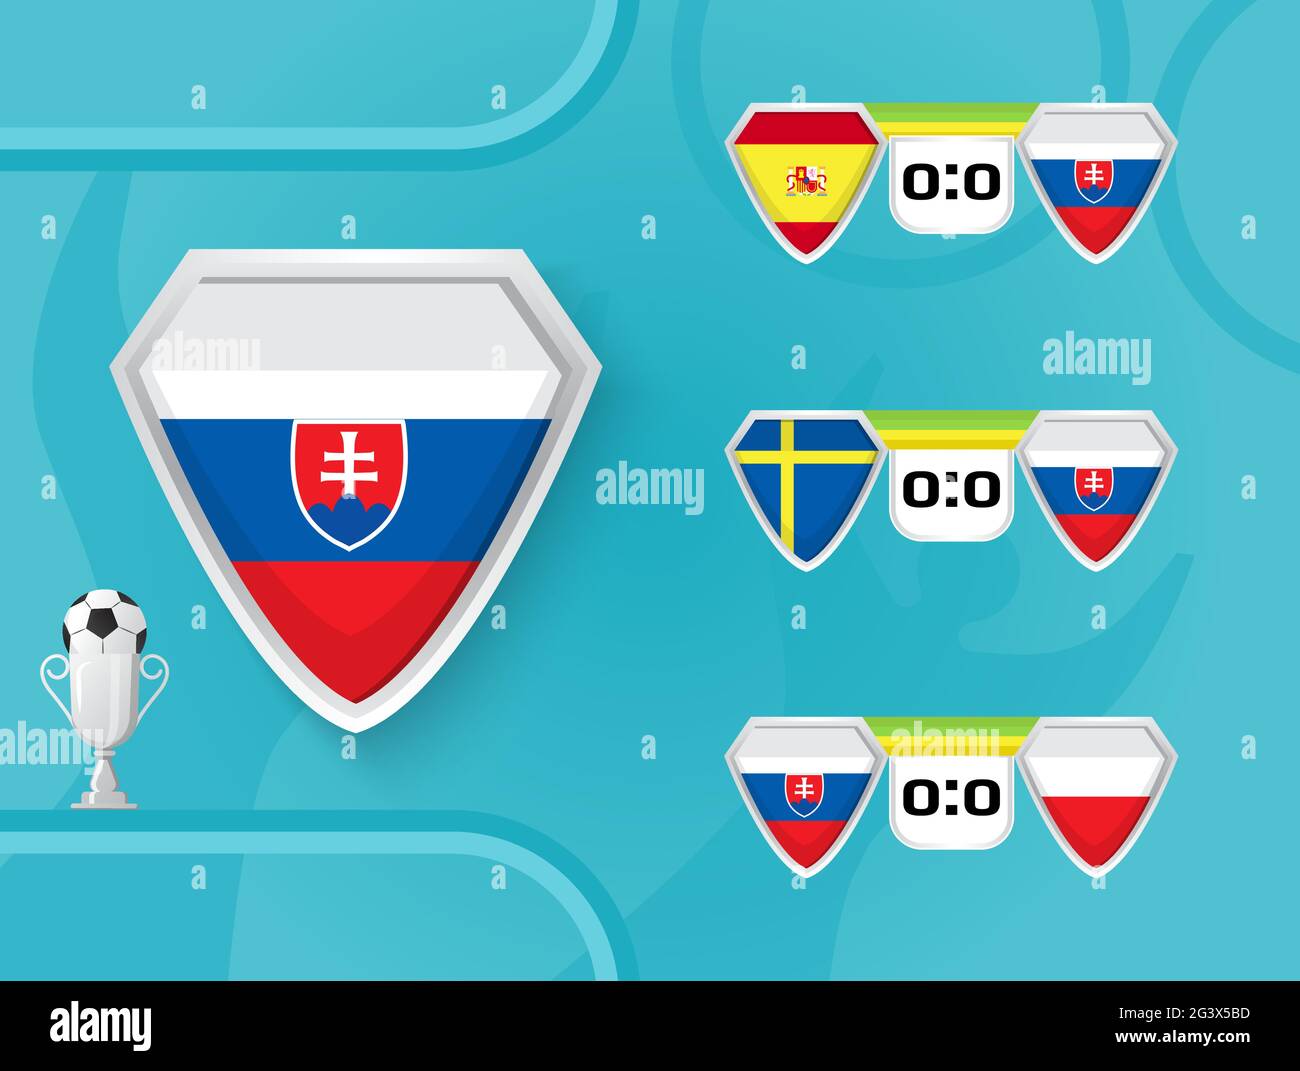 Schedule of national football team of Slovakia matches in the European Championship 2020. European soccer champion cup are shown. Shields with the fla Stock Vector